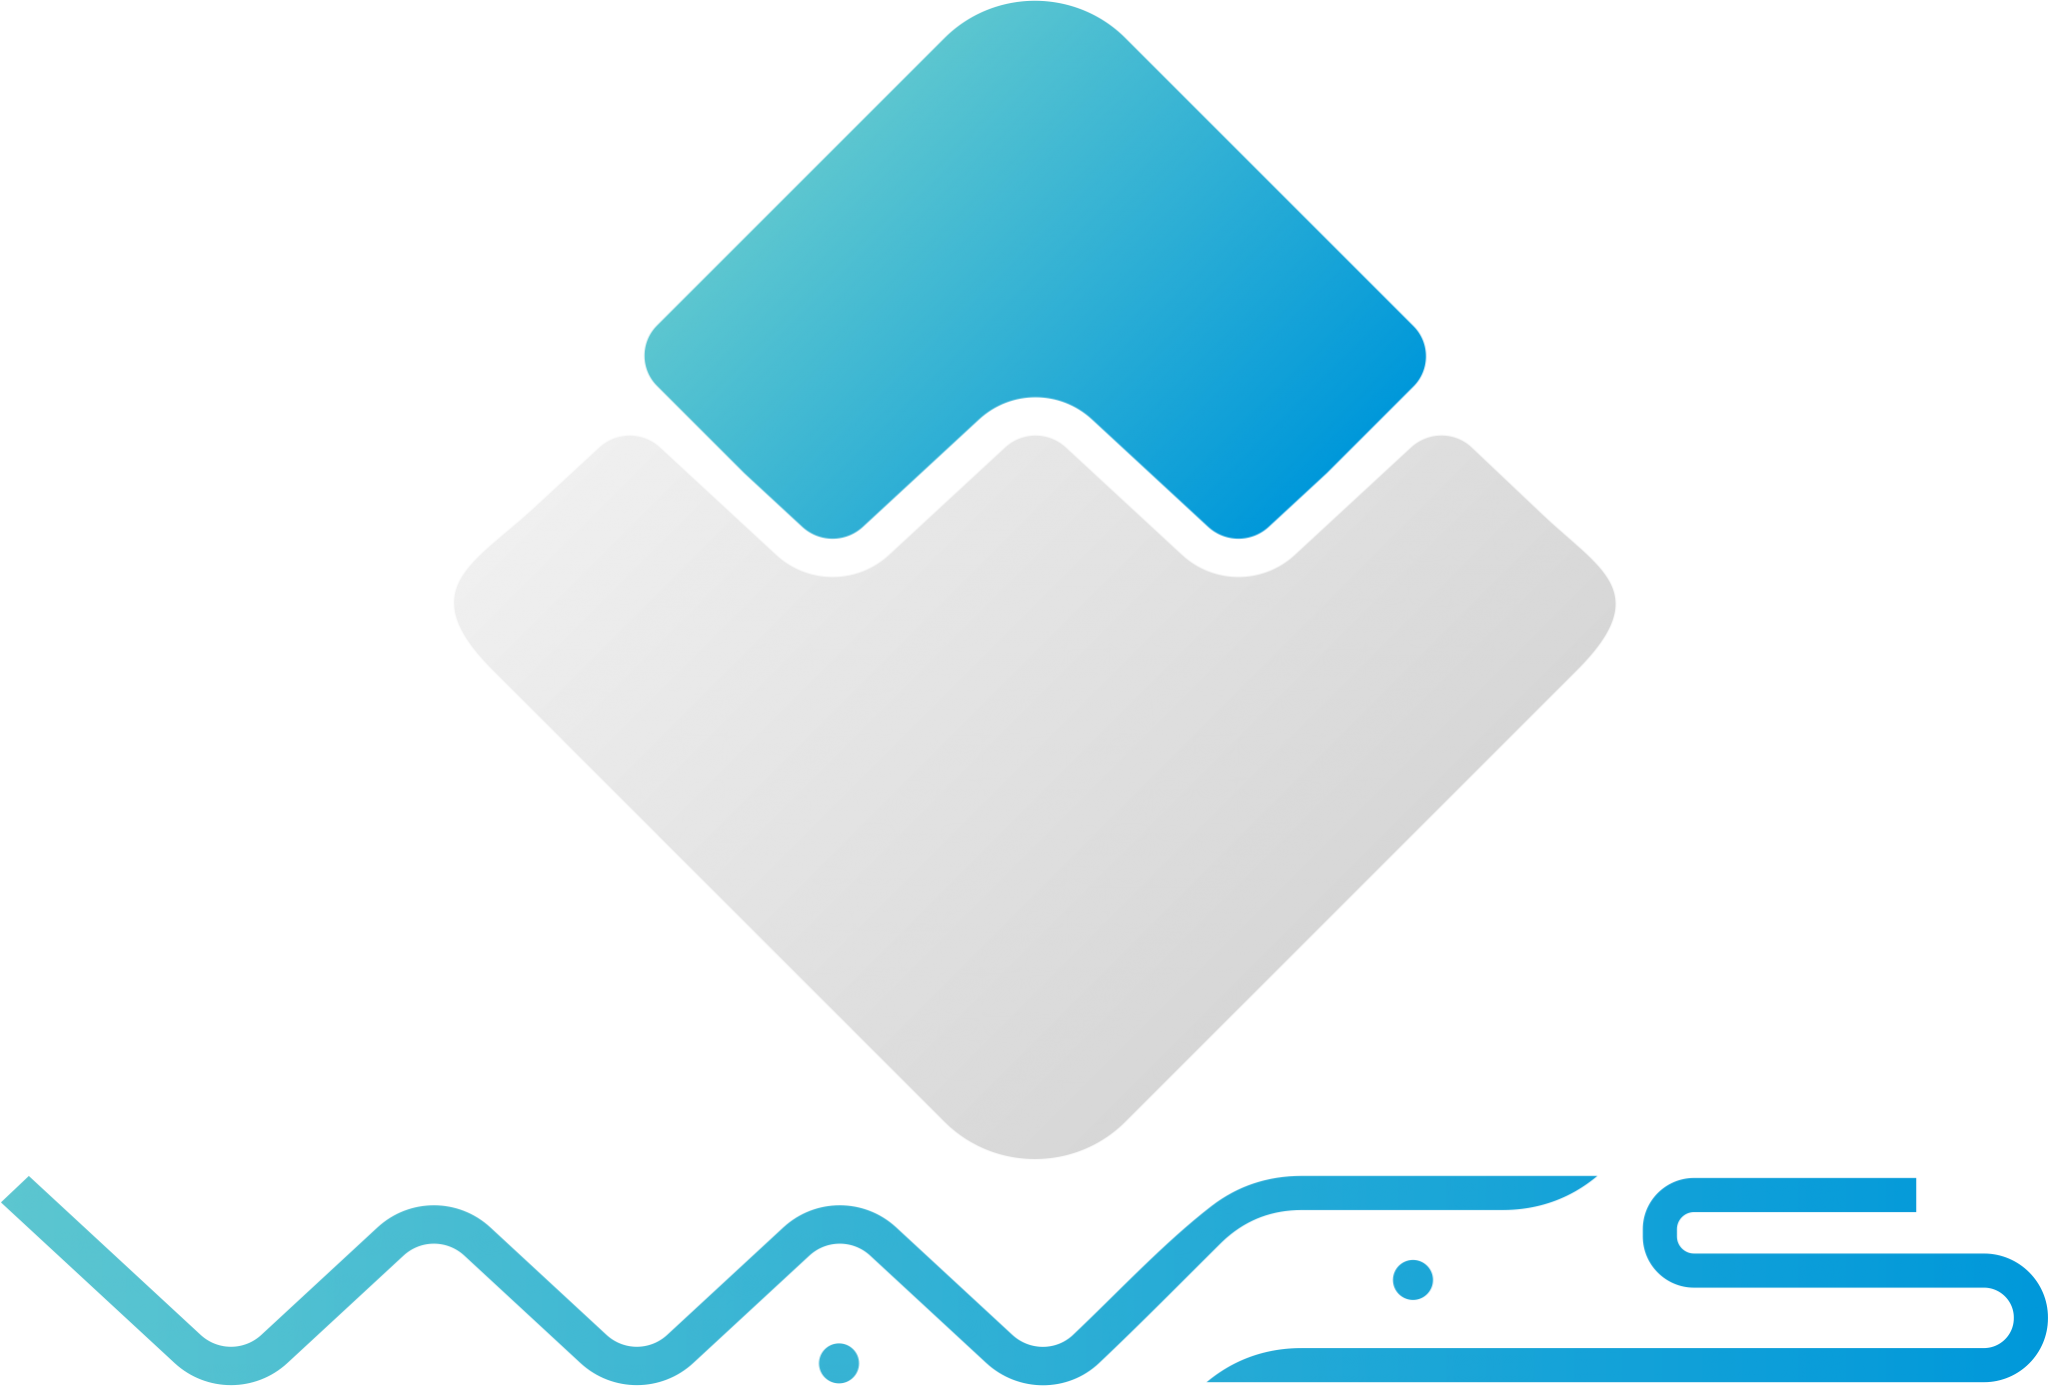 Offering Initial Blockchain Bitcoin Cryptocurrency Platform Waves PNG Image